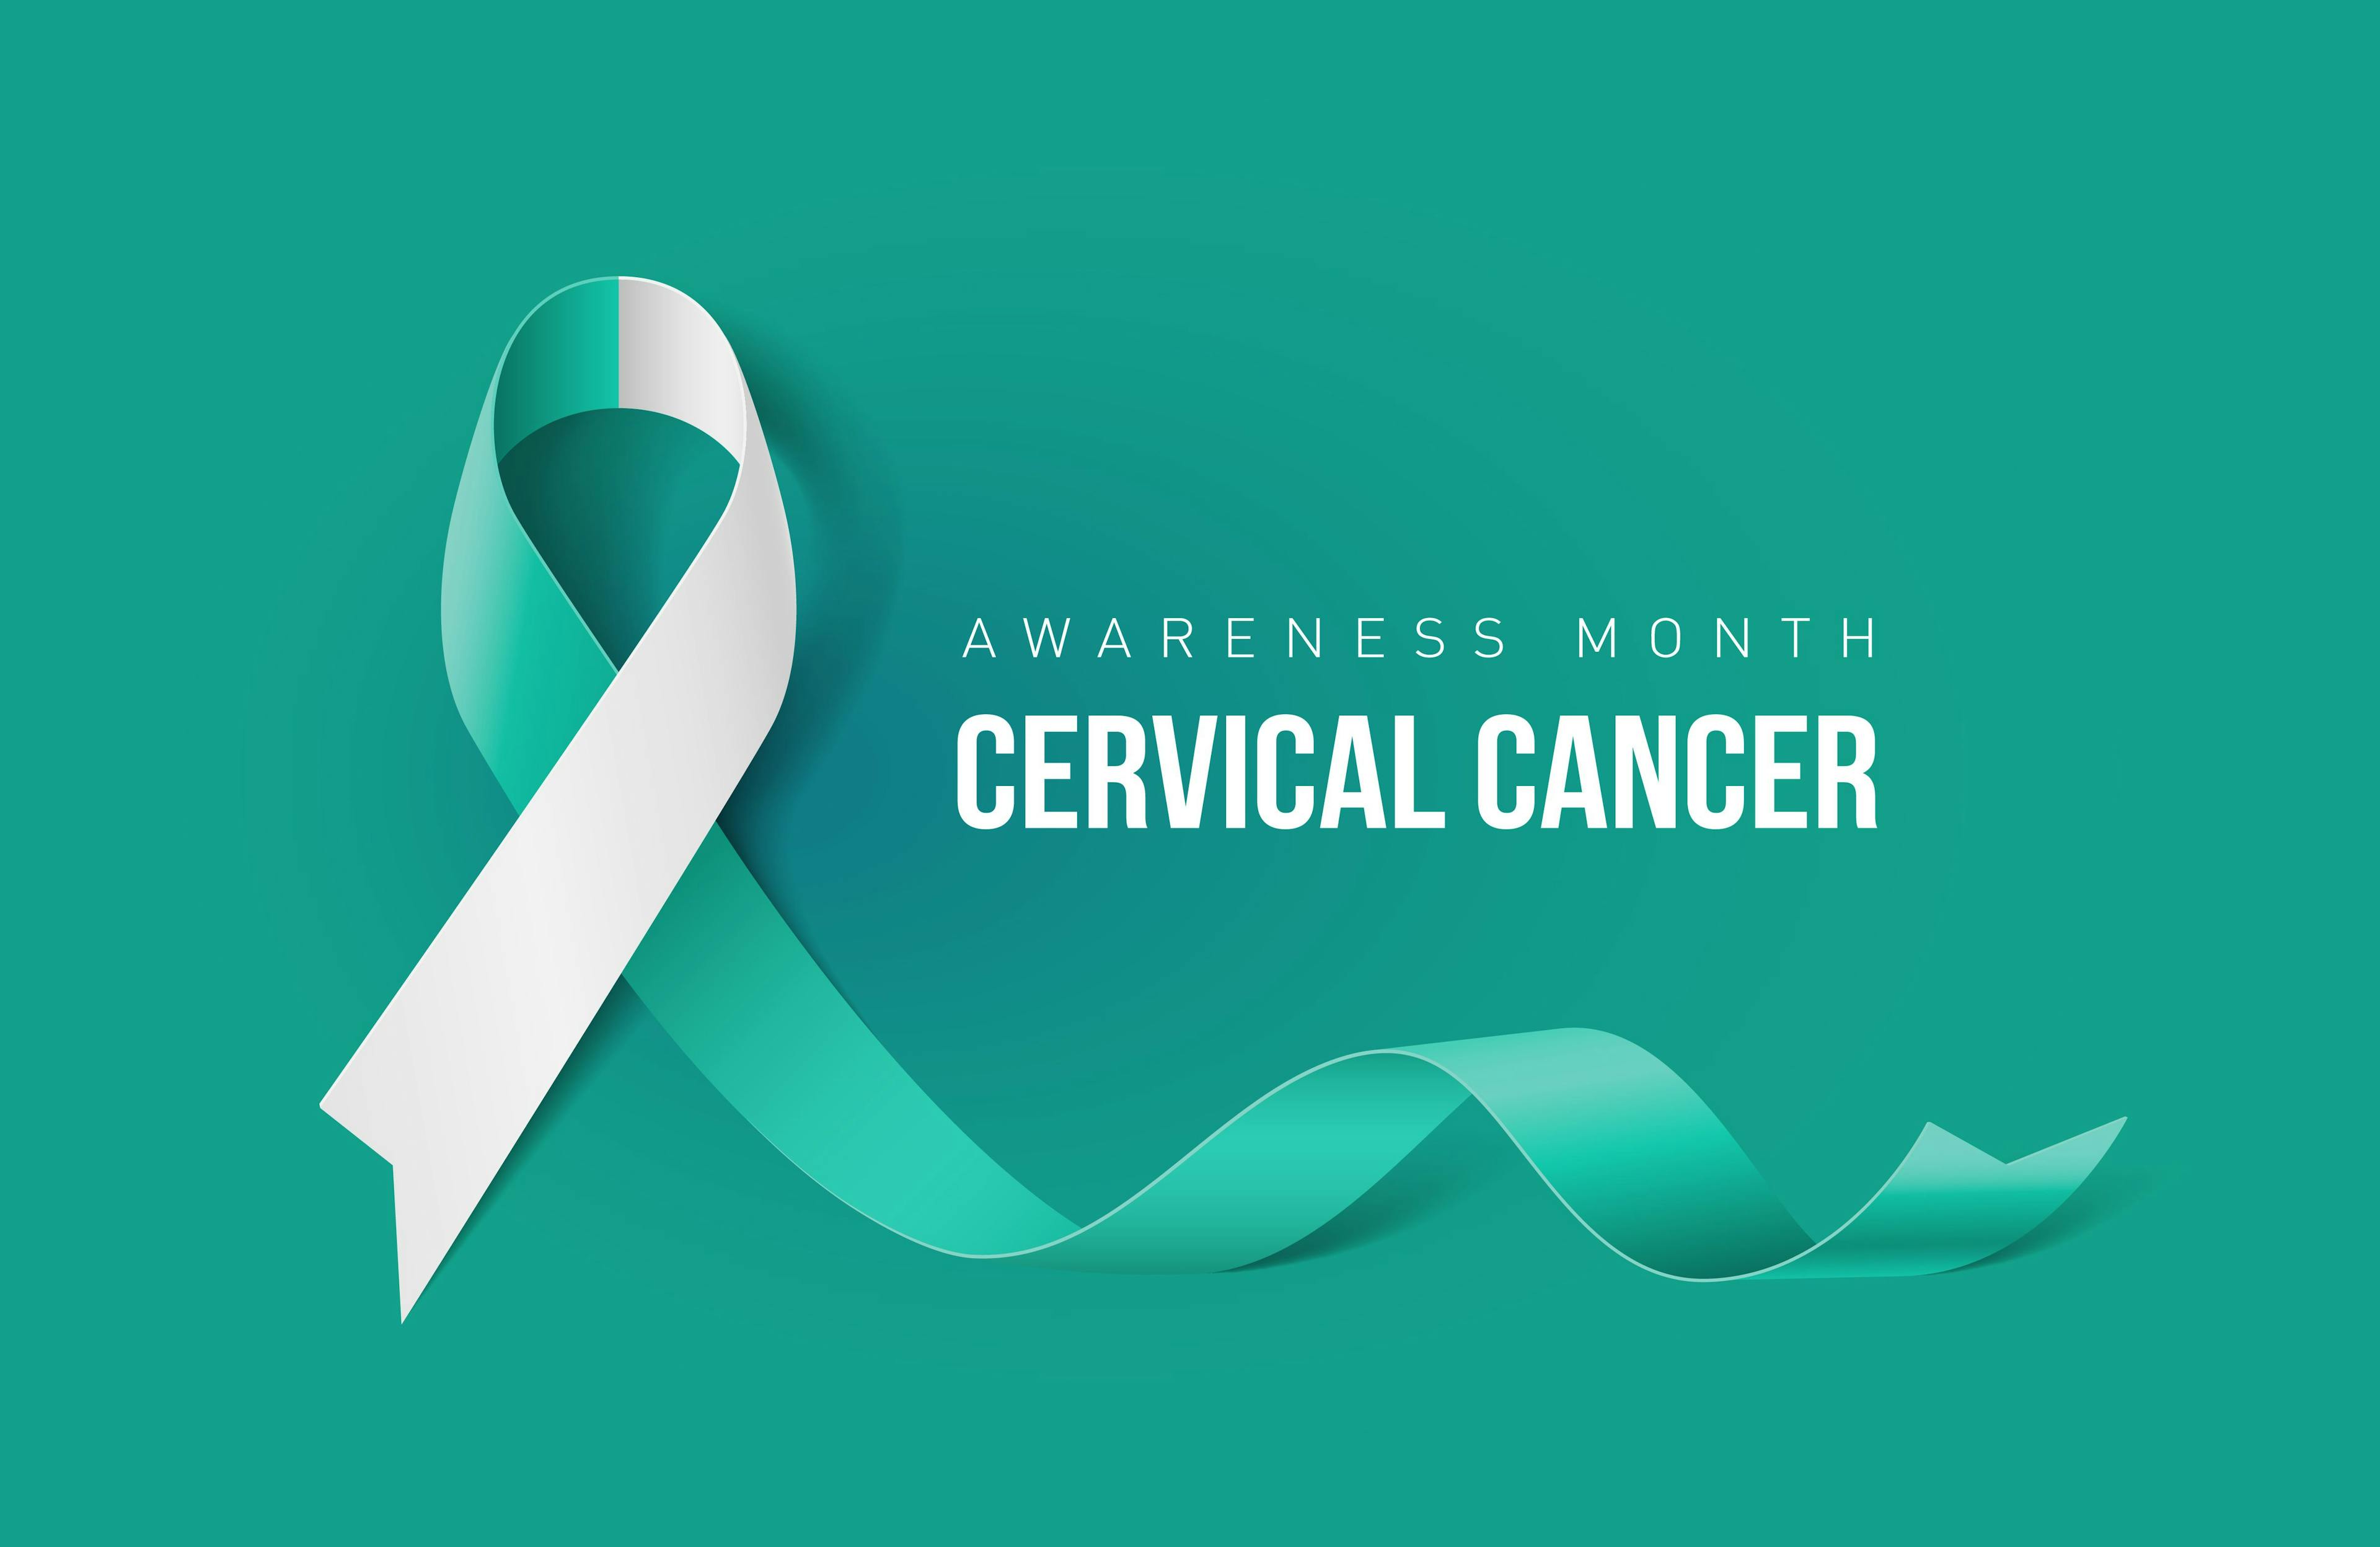 Cervical Cancer Awareness Month: By the numbers